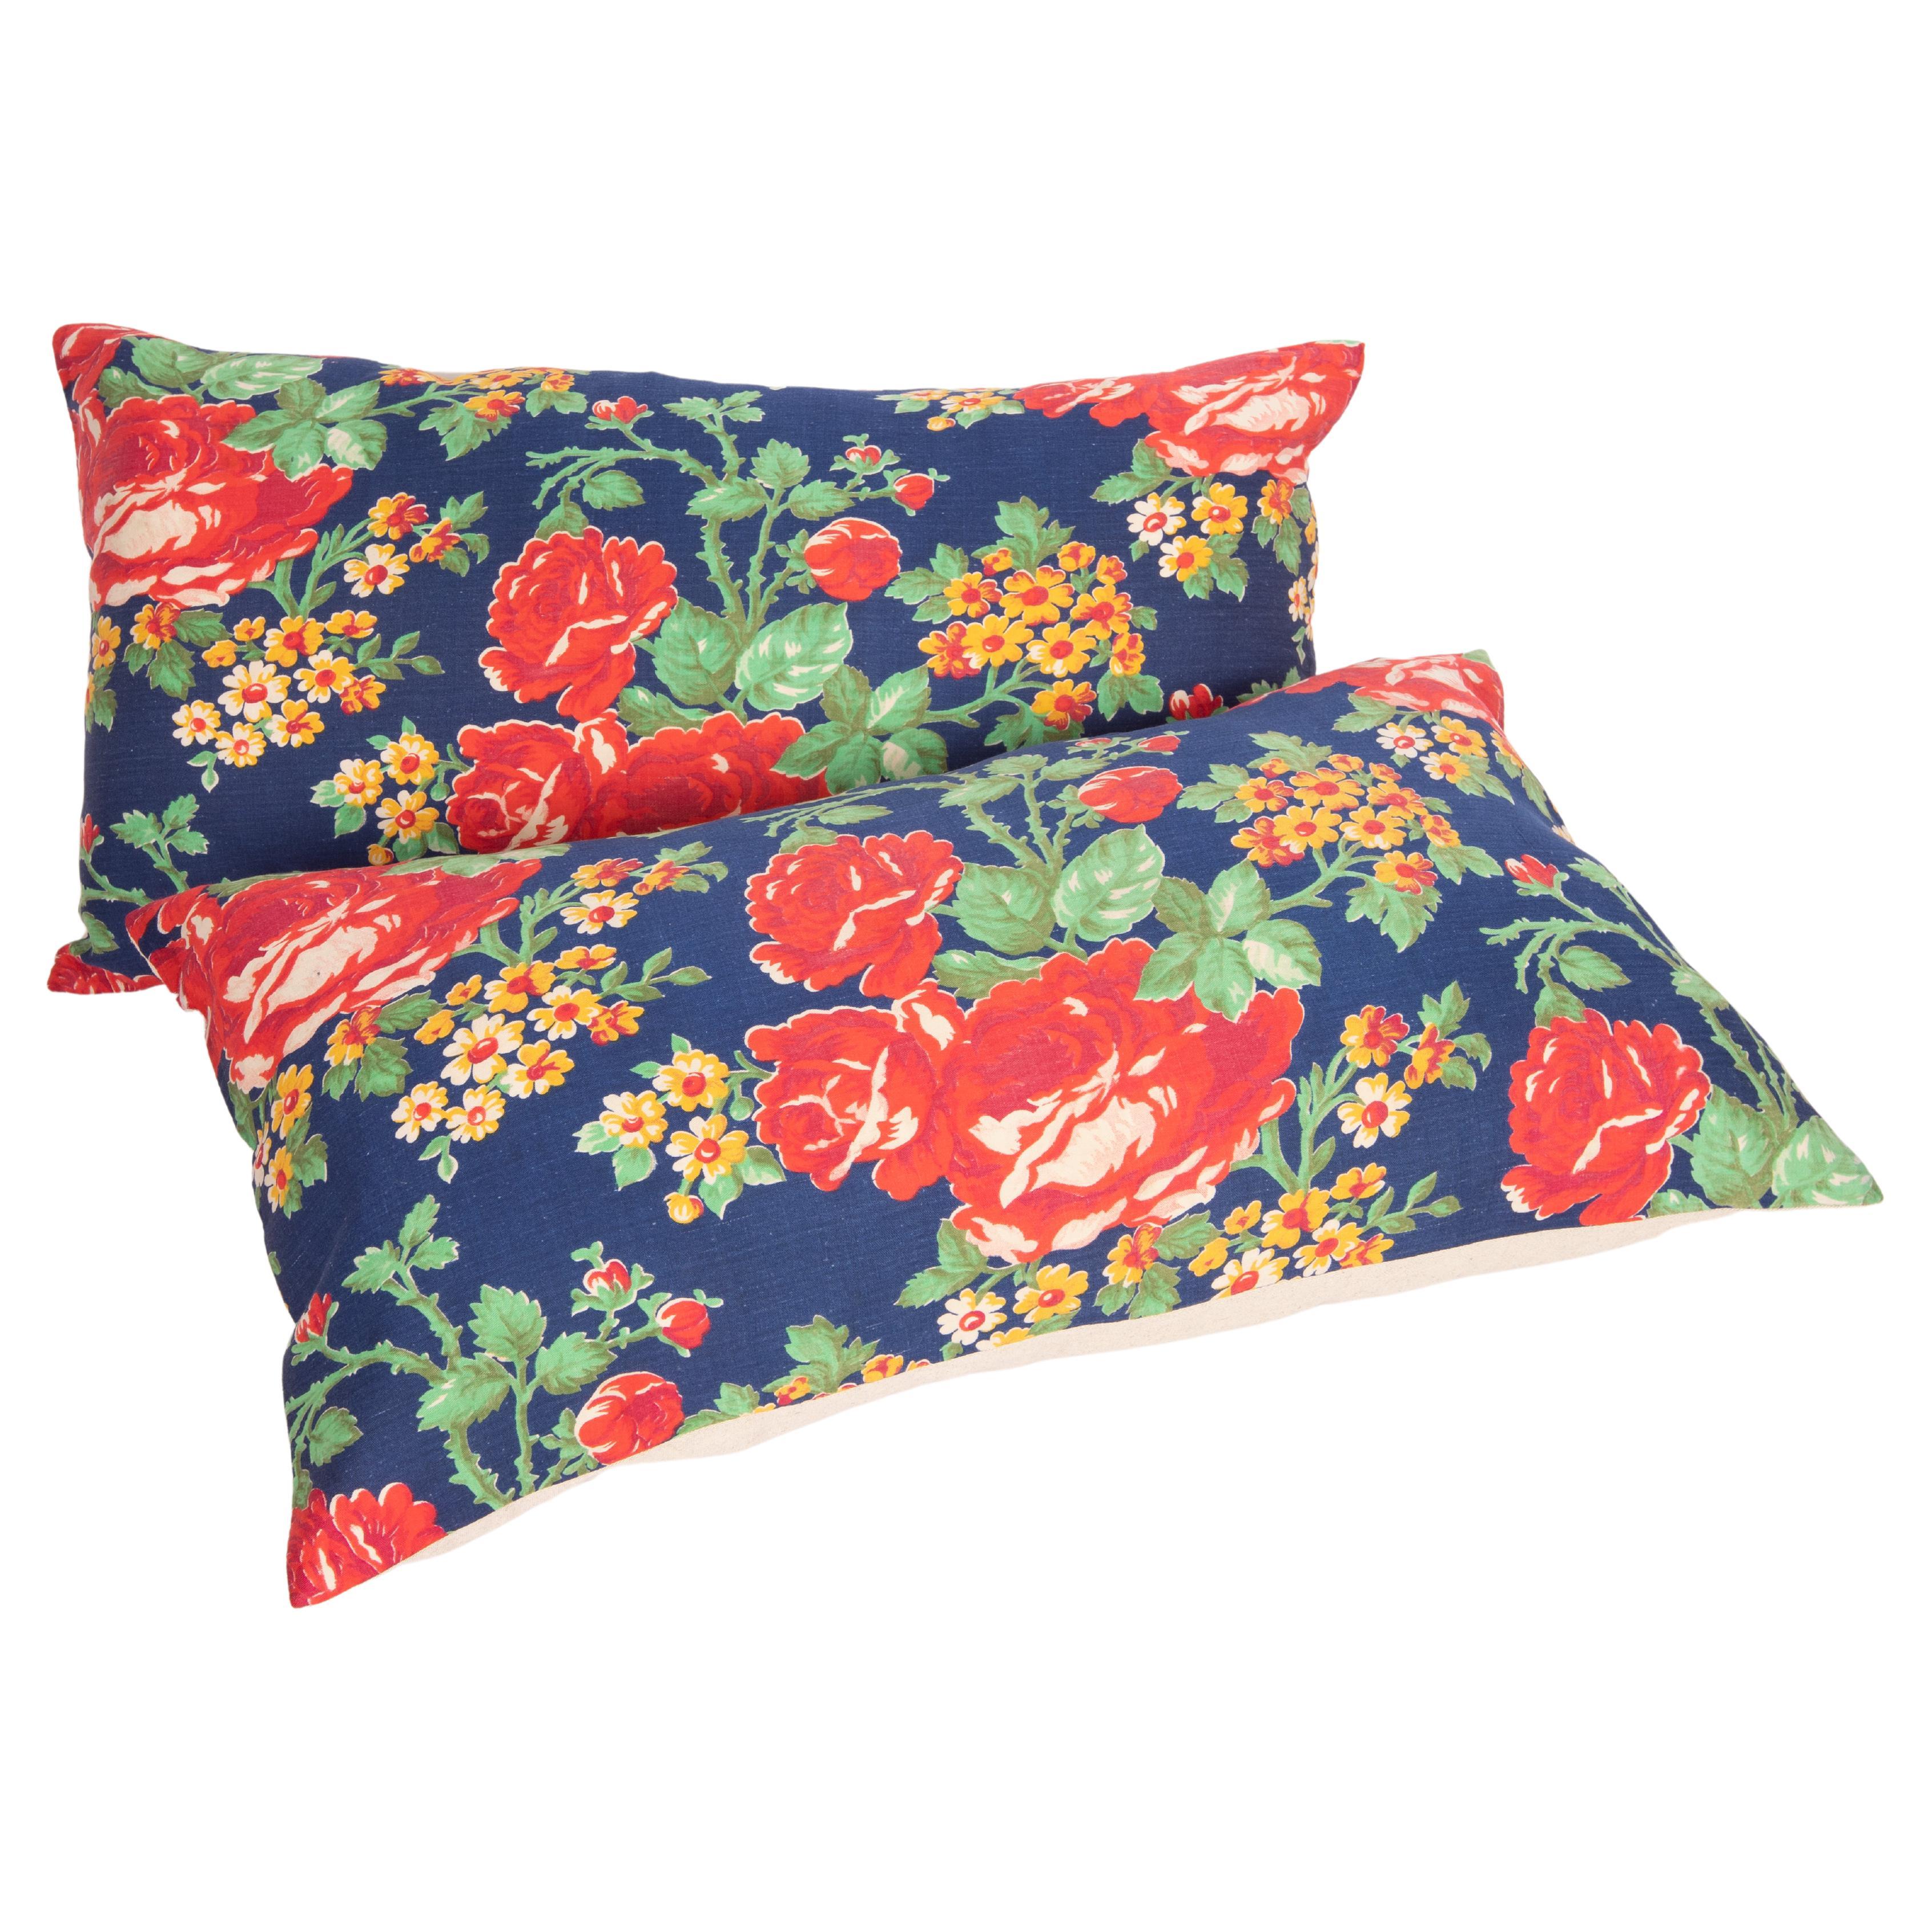 Russian Roller Printed Pillow Covers, Mid-20th C